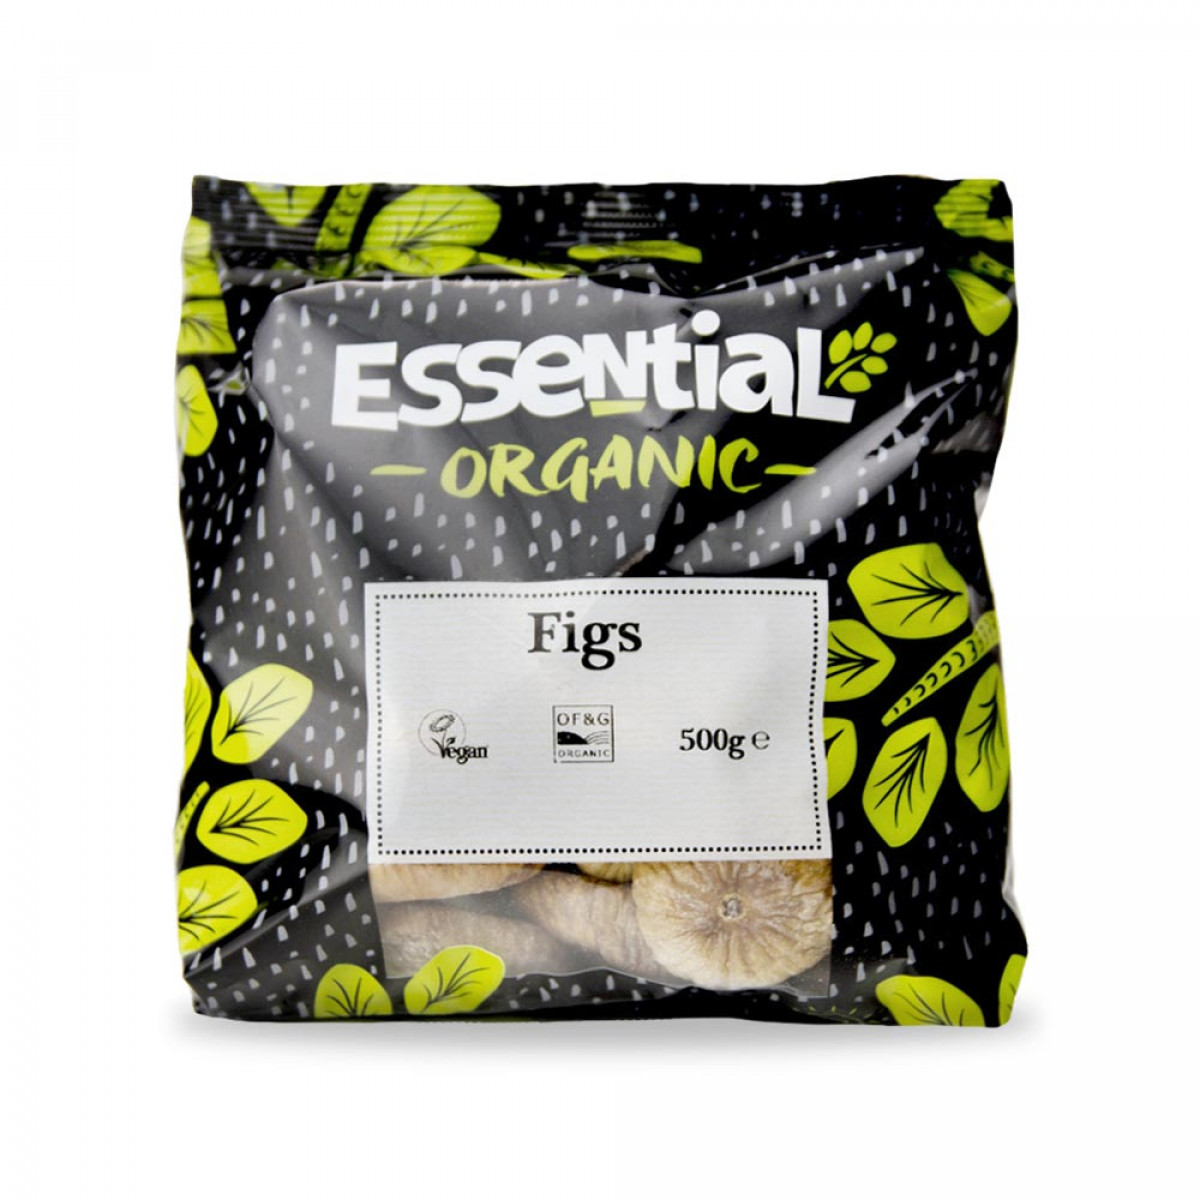 Product picture for Figs